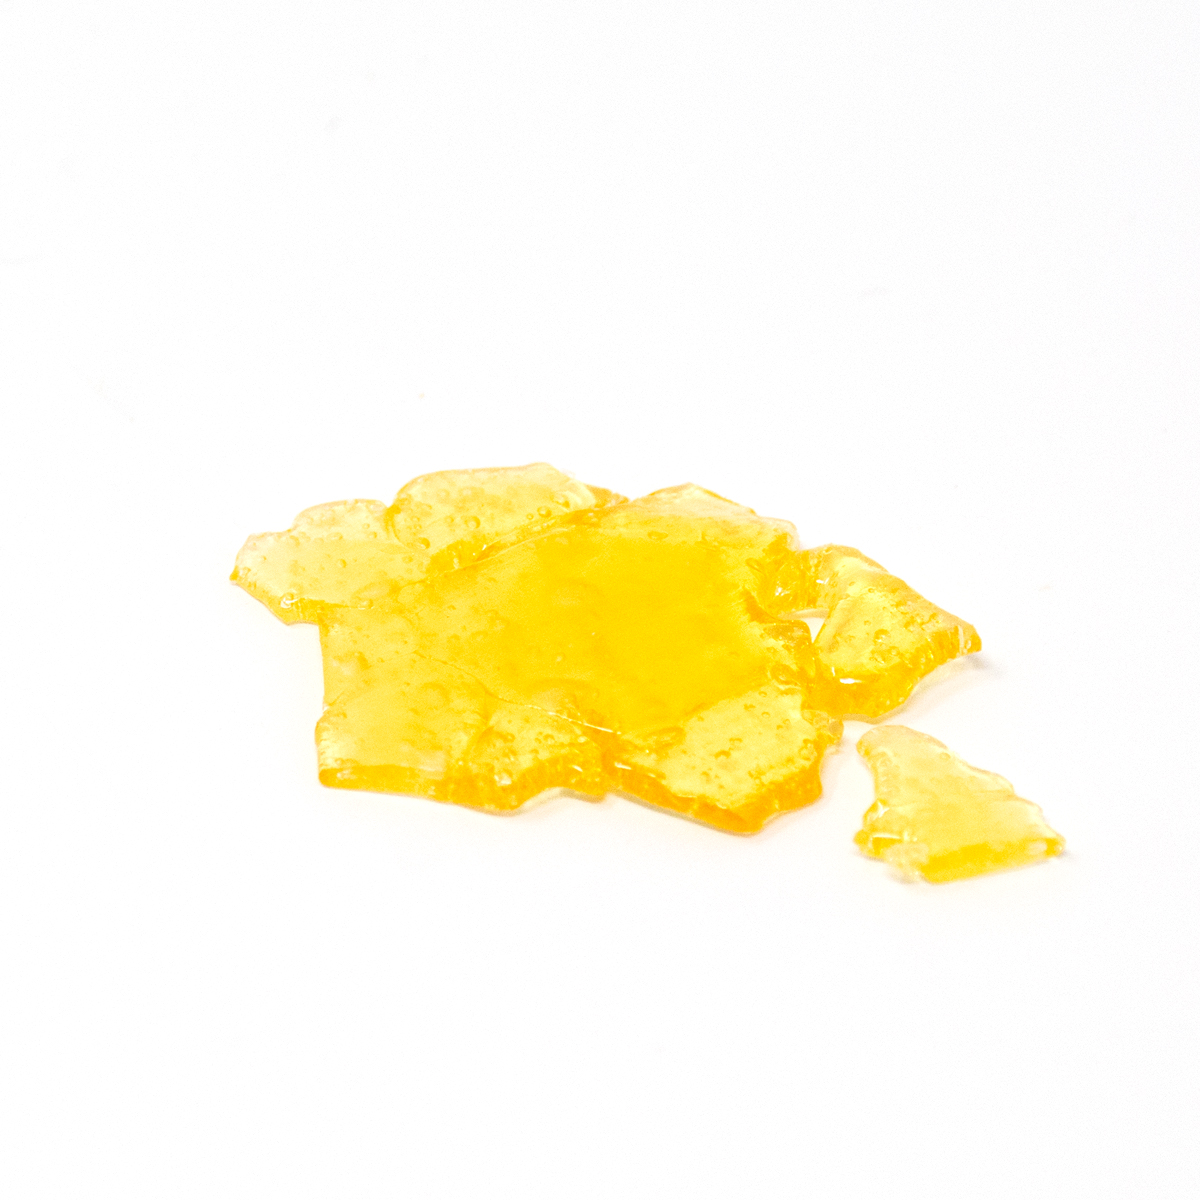 Kushberry Shatter by Exotic Extracts